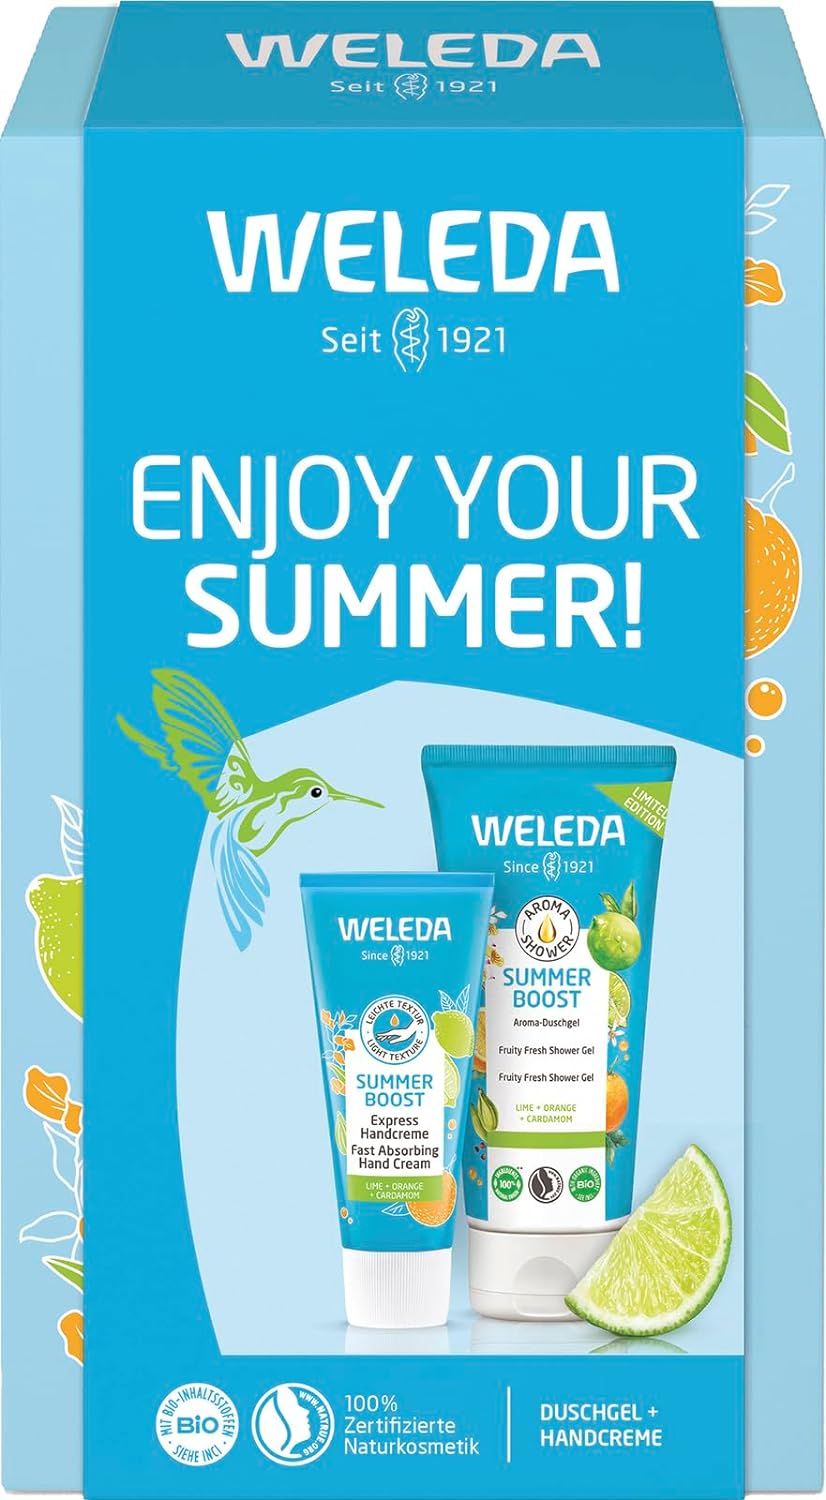 WELEDA Organic Gift Set Summer Boost Natural Cosmetics Gift Box Consisting of Limited Edition Aroma Shower Gel & Express Hand Cream Optimal Gift Set for Daily Care of Body and Hands